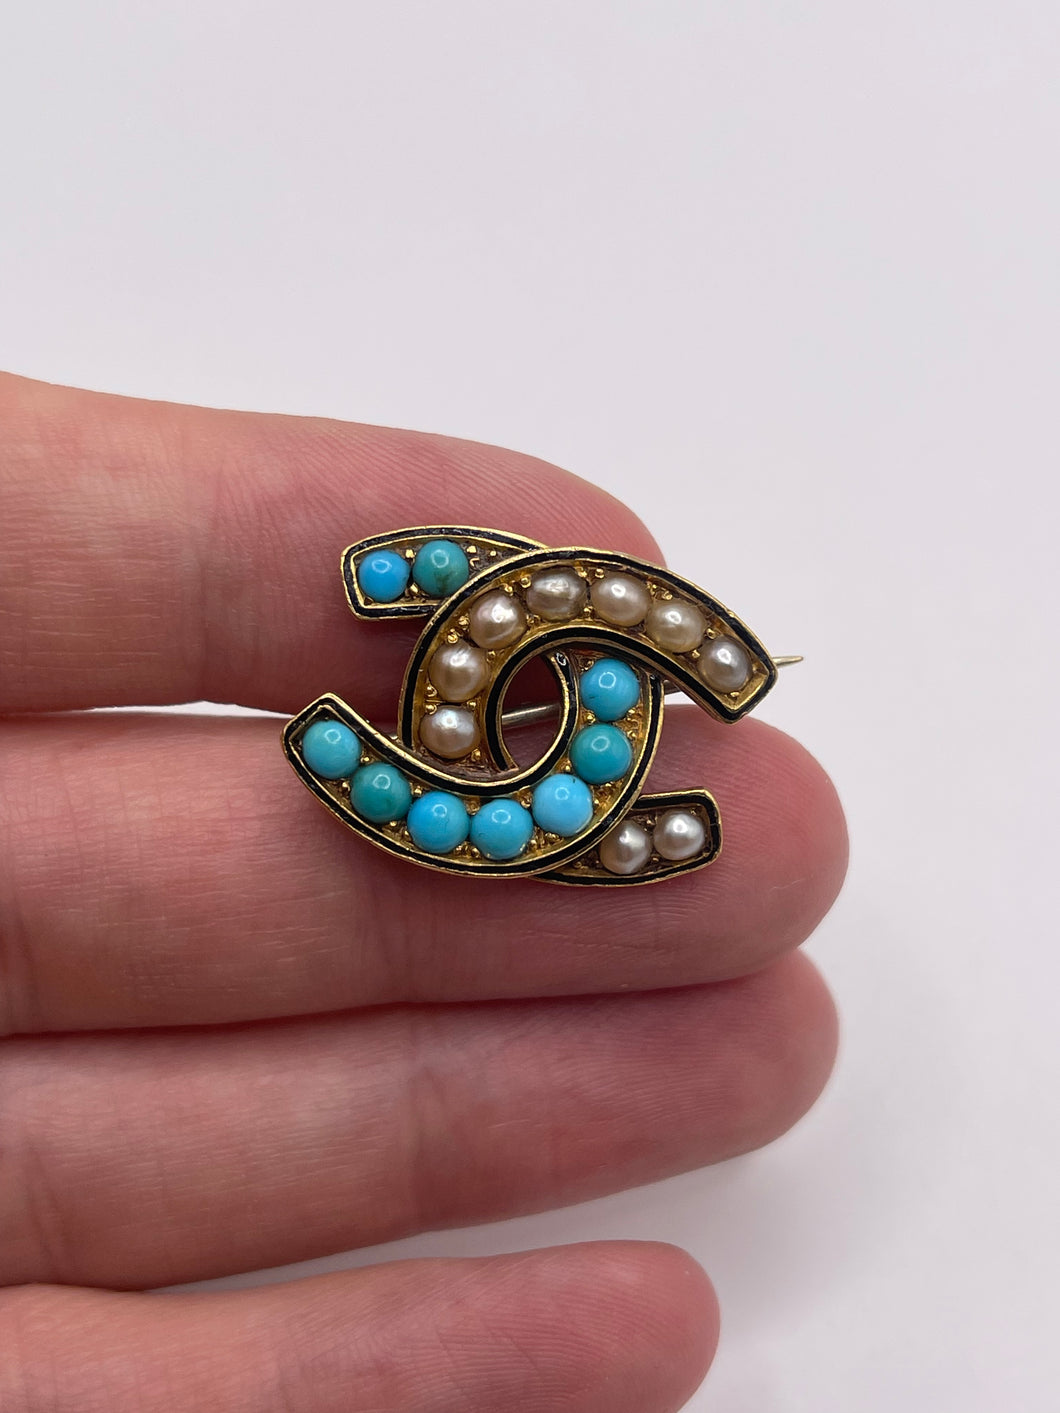 15ct gold turquoise, pearl and enamel brooch